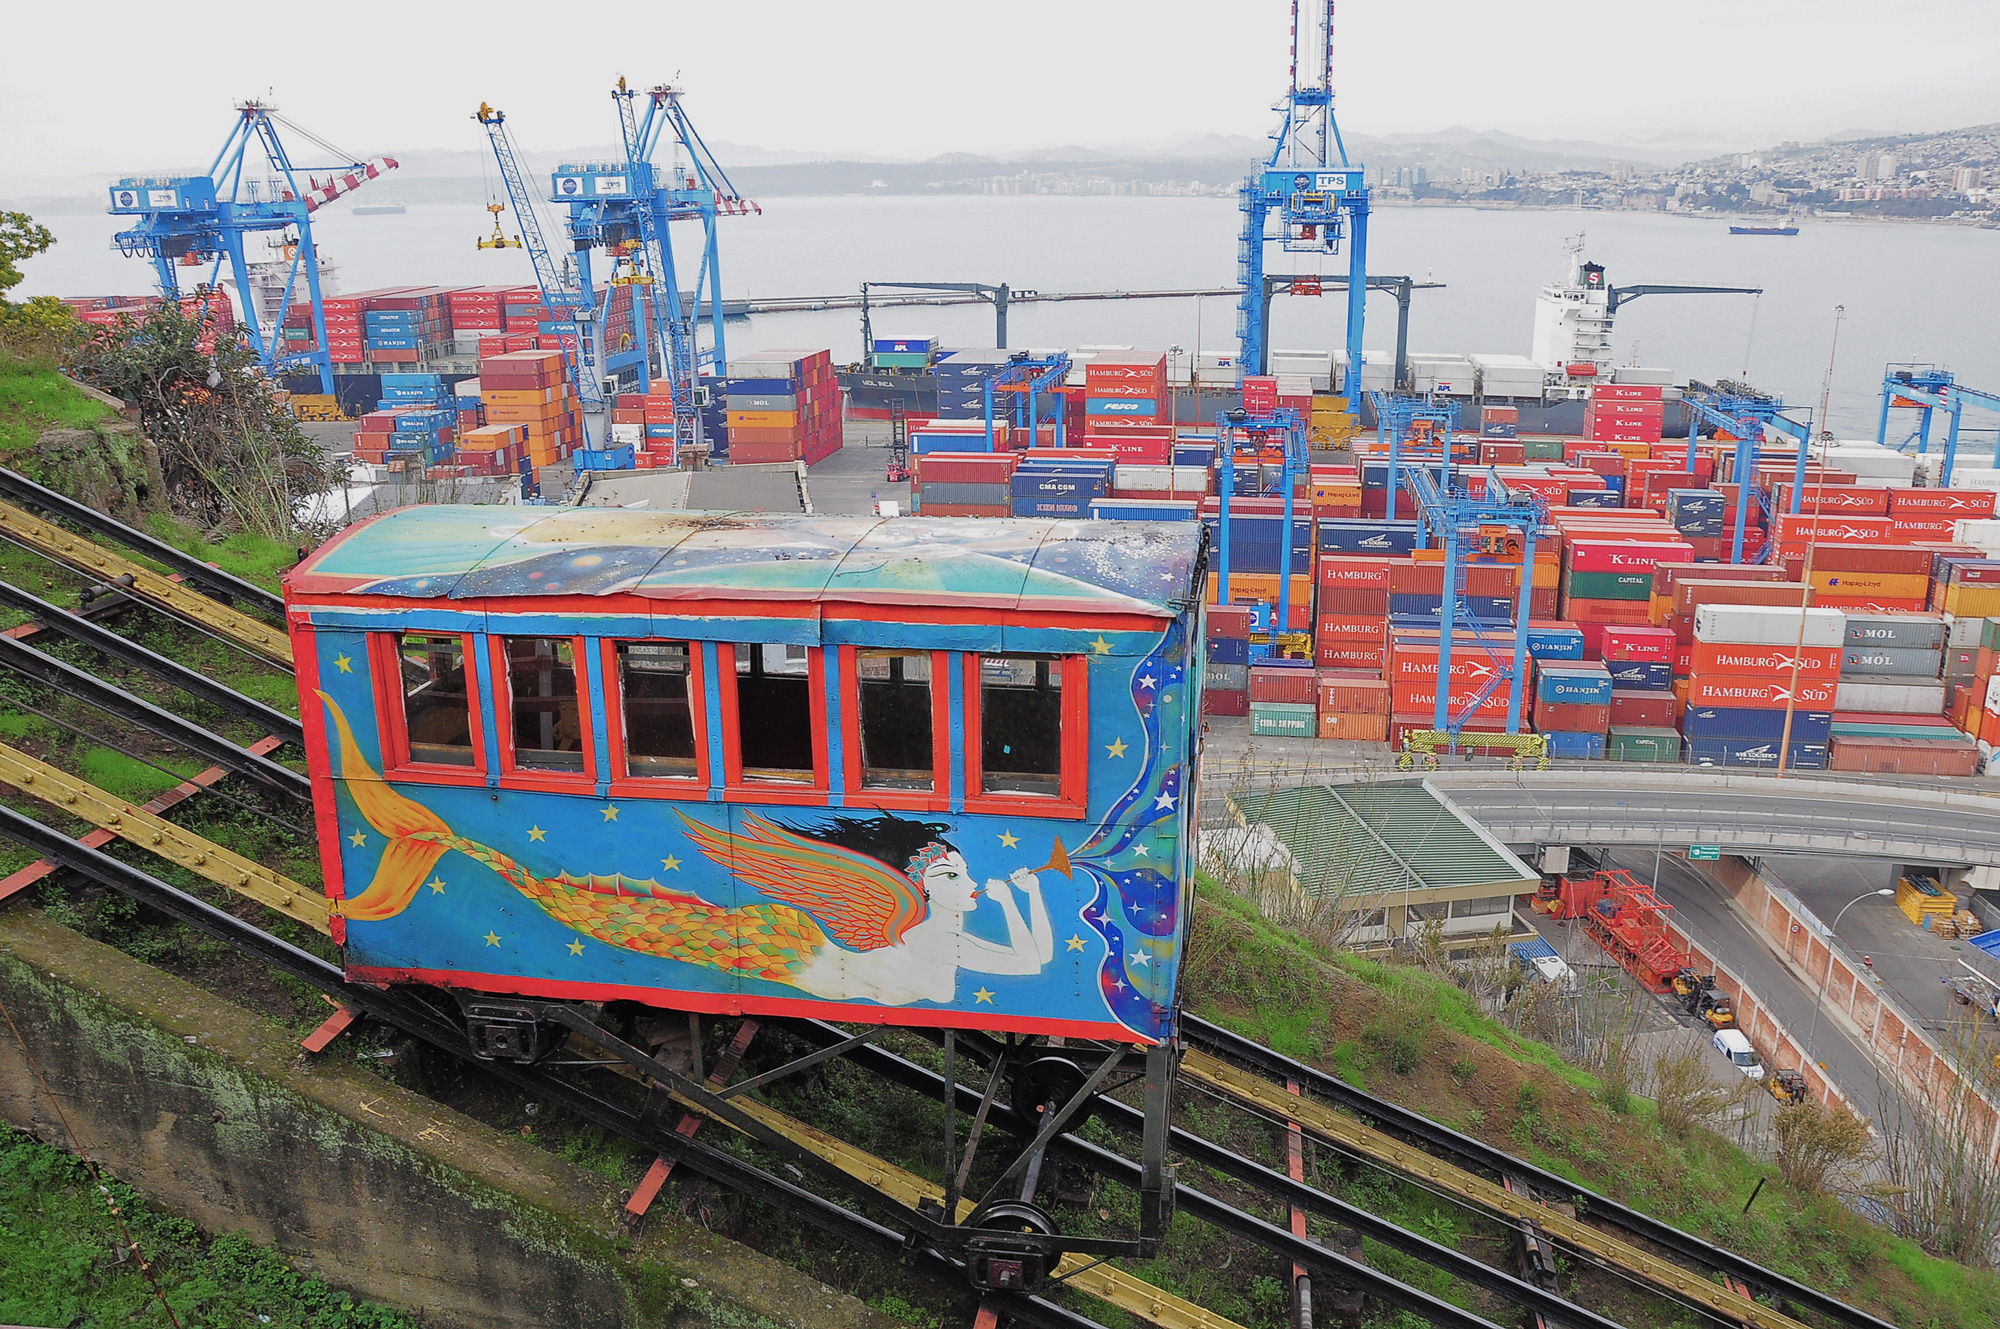 Historic funicular with a vista over the port of Valparaíso, Chile